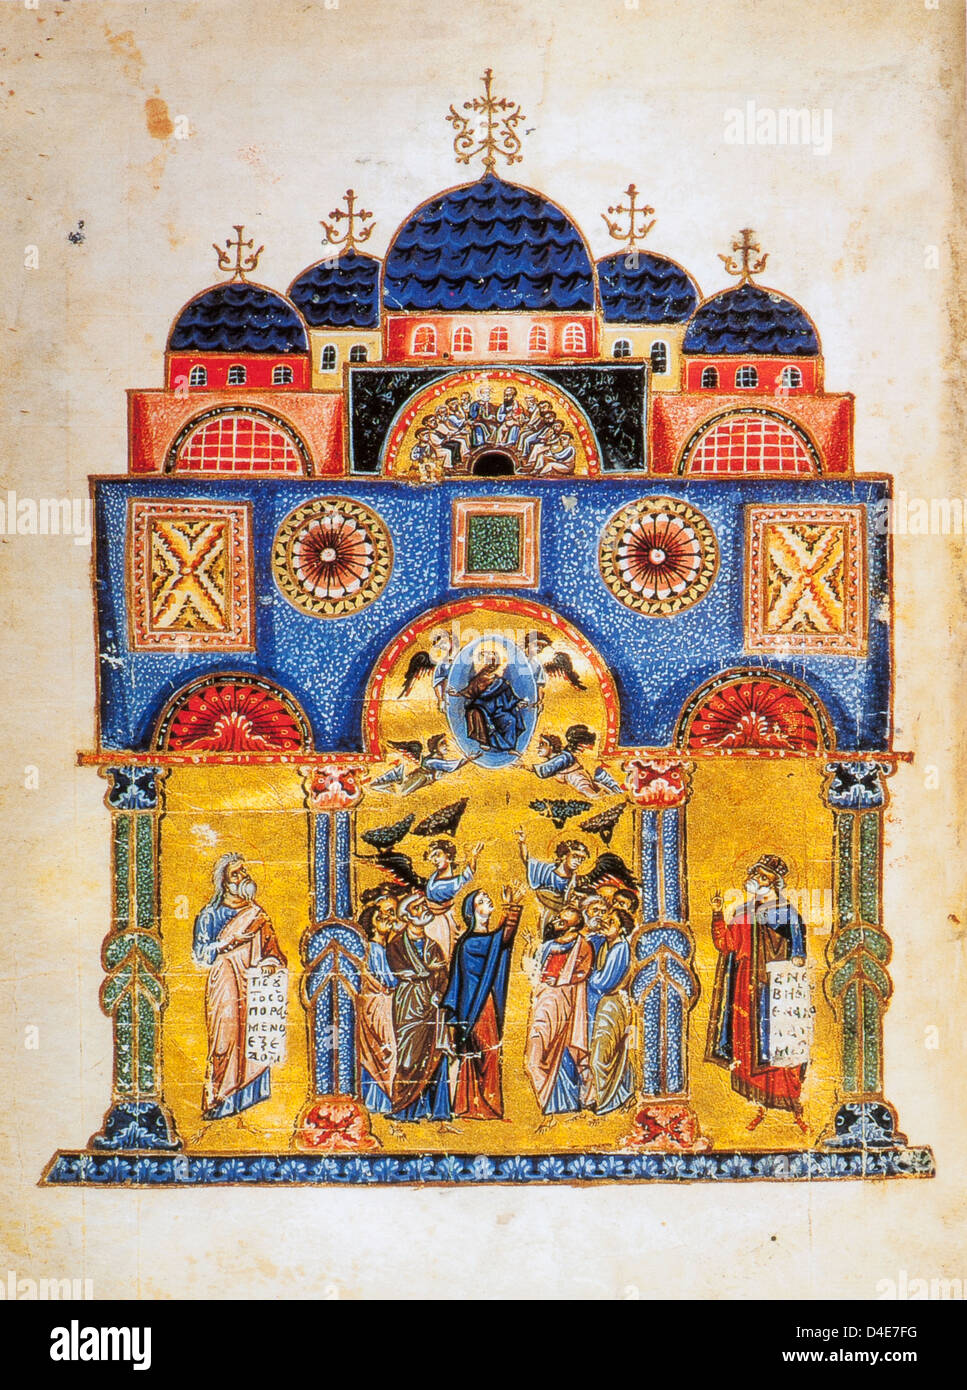 Ascension by Jacobus of Kokkinobaphos twelfth century Frontispiece to the Homilies in Bibliotheque Nationale, Paris Stock Photo